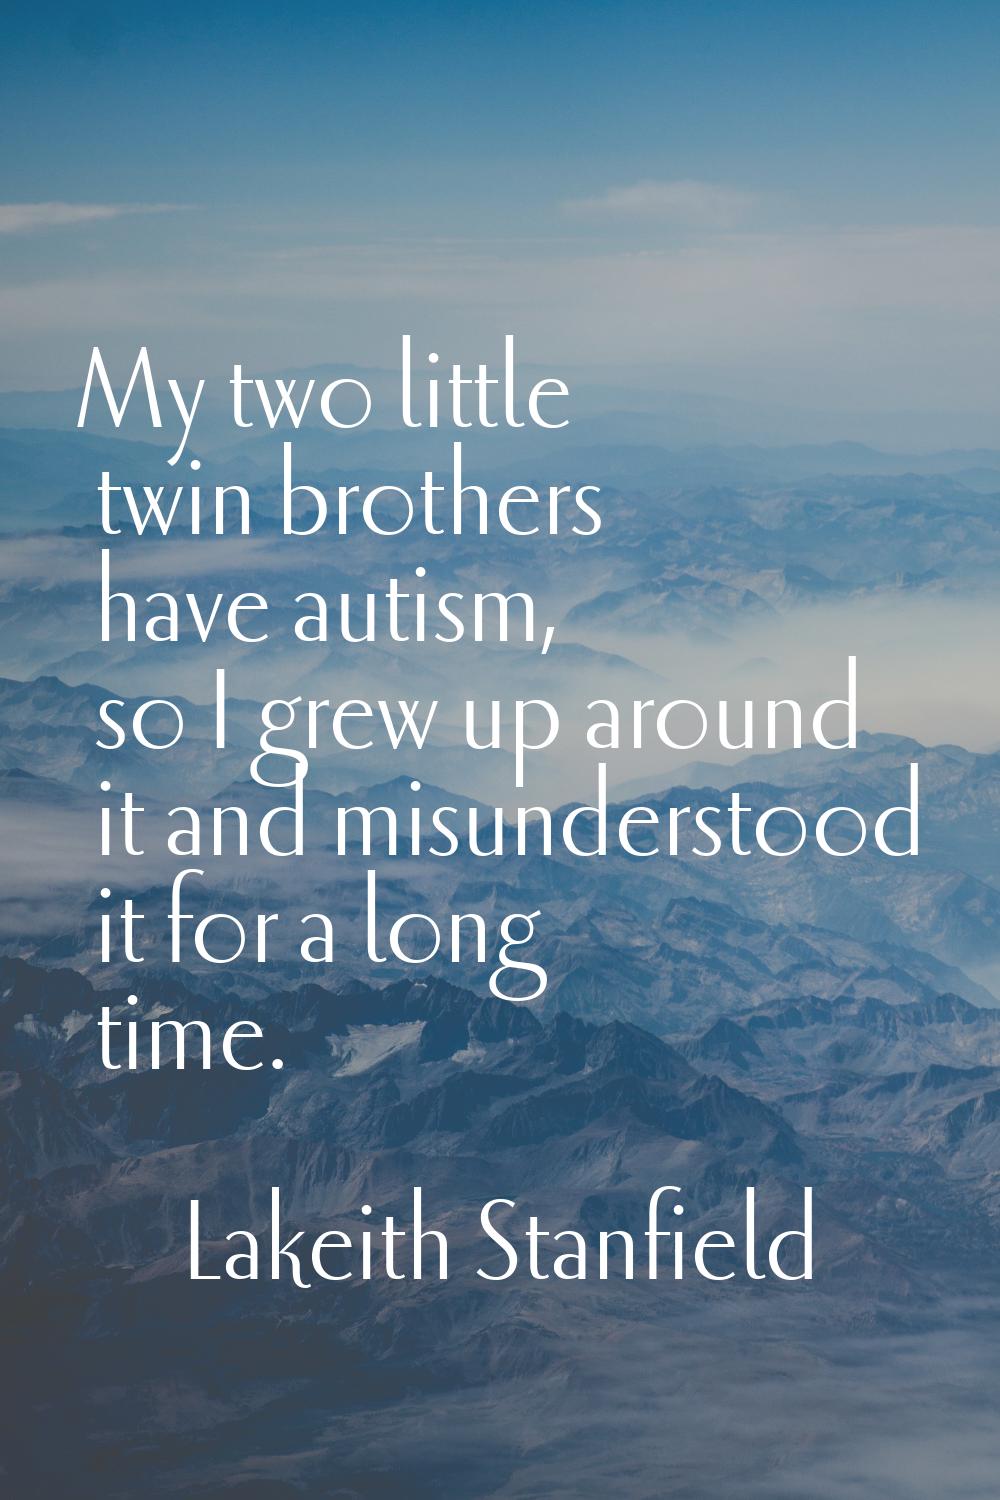 My two little twin brothers have autism, so I grew up around it and misunderstood it for a long tim